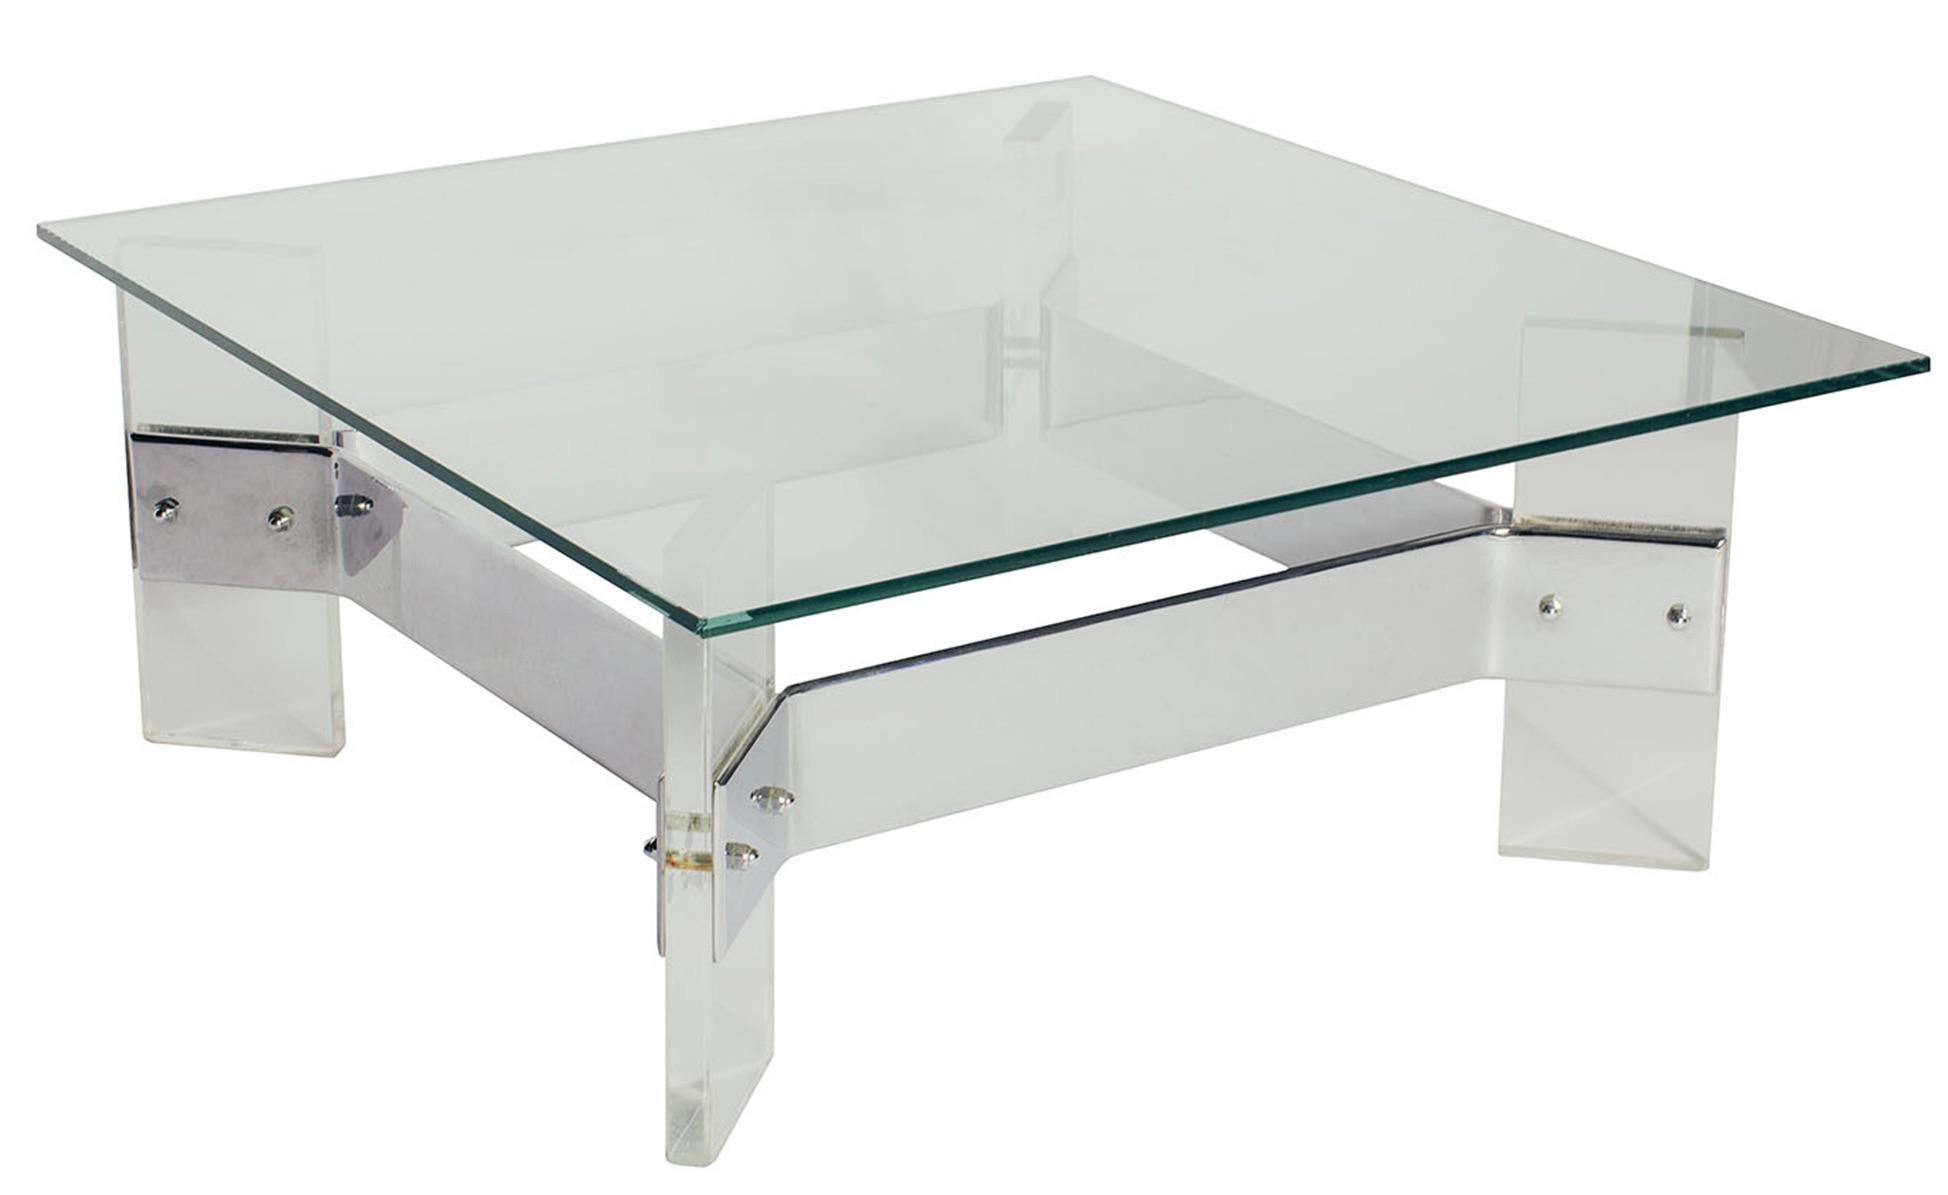 Vintage Midcentury Belgian Lucite Steel Coffee Table with Glass Top In Good Condition For Sale In New York, NY